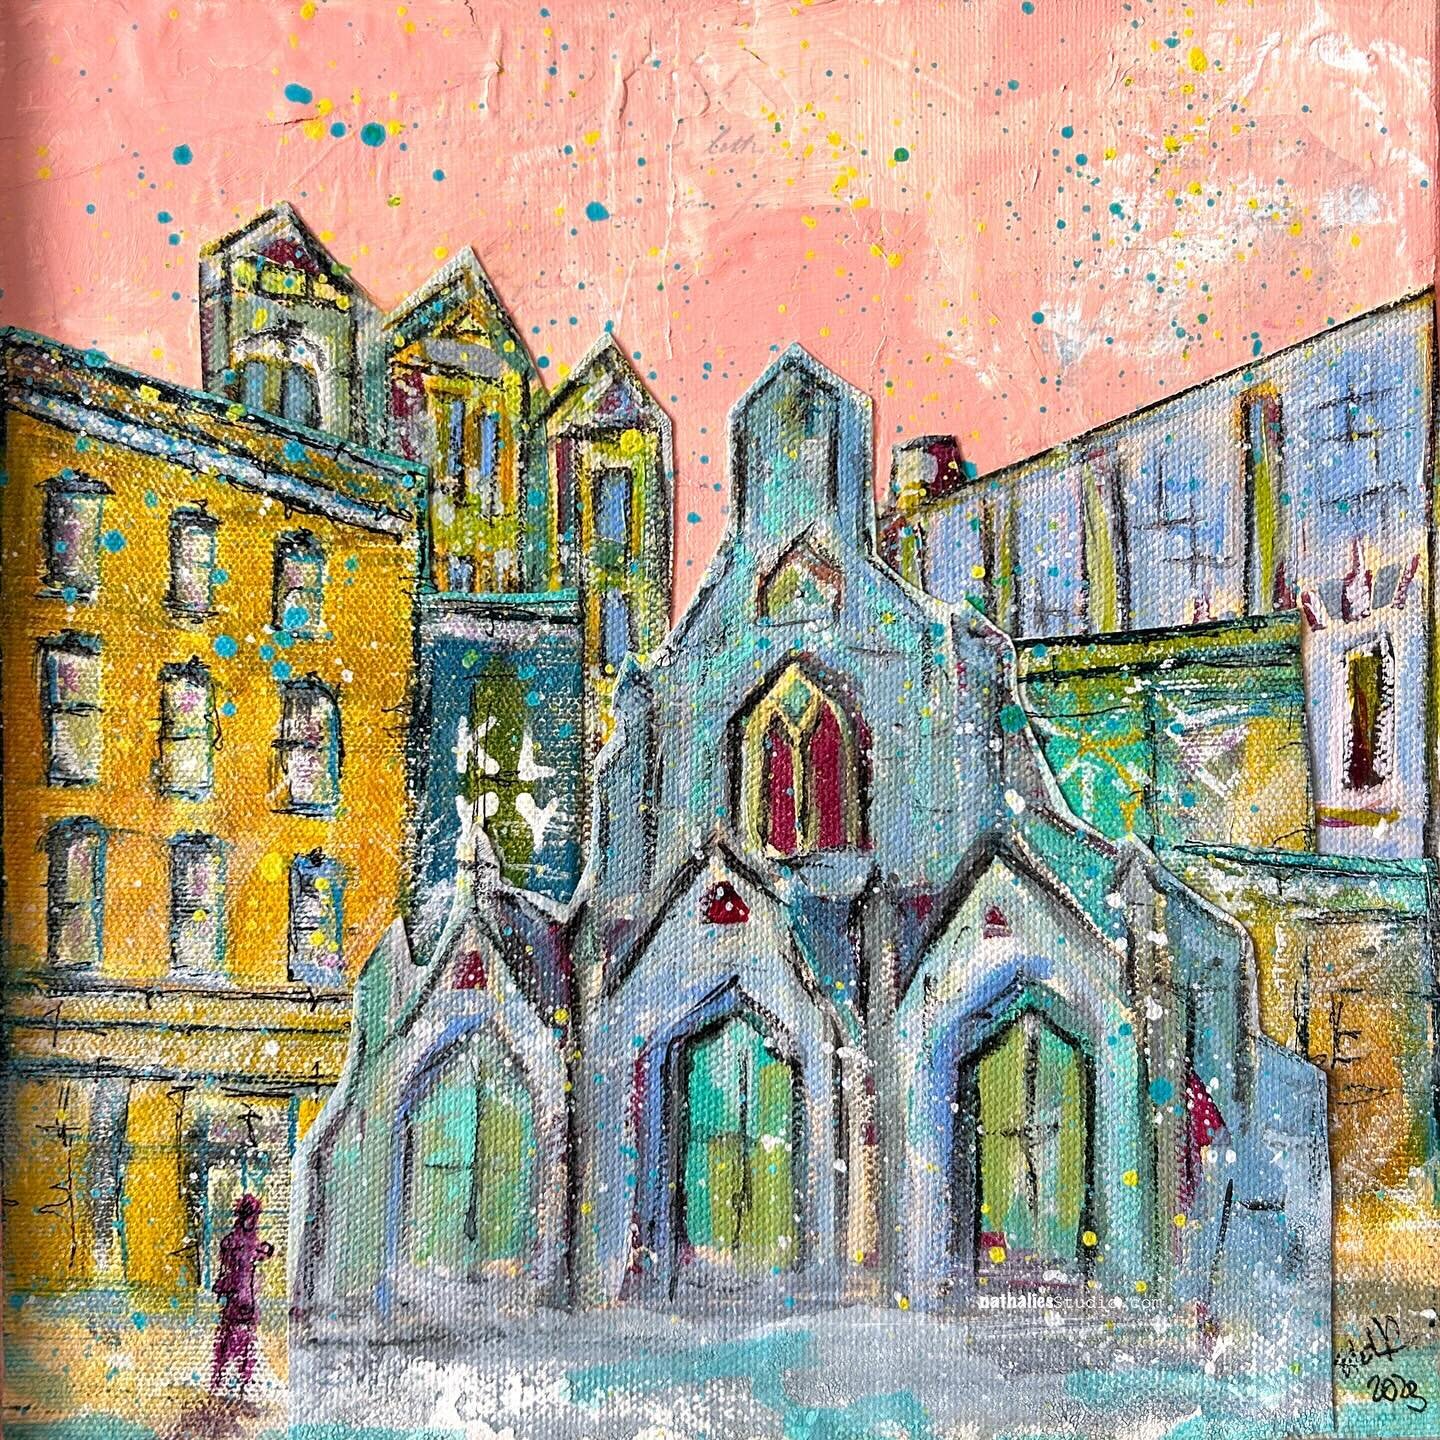 &bdquo;No Man is An Island&ldquo; is a collage painting I recently finished, featuring, as often is the case, a church building. There&rsquo;s something captivating about these architectural wonders. Recently, I&rsquo;ve had the opportunity to explor